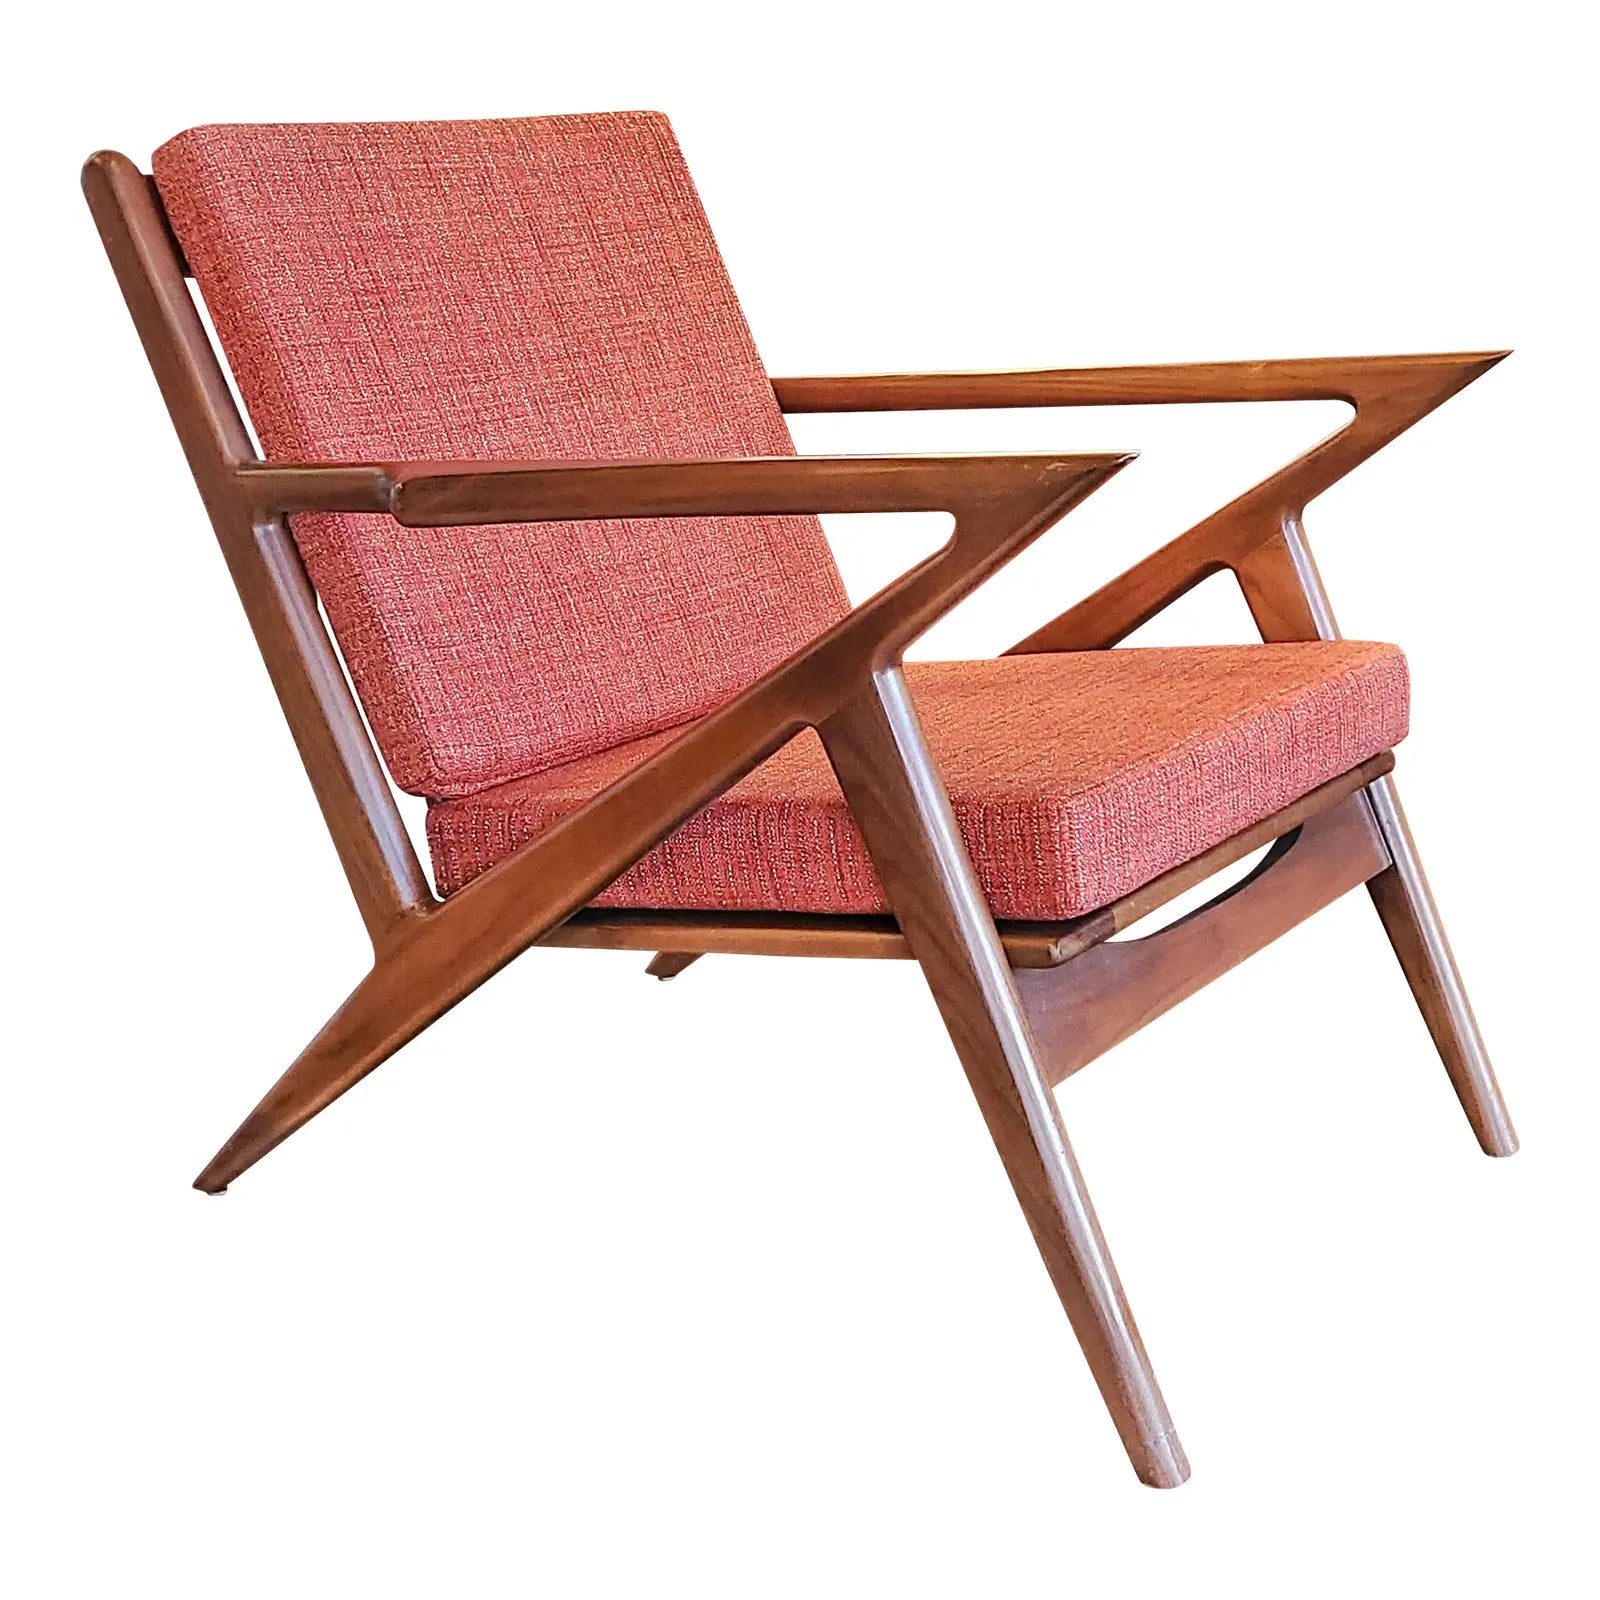 “Z” LOUNGE CHAIR IN THE STYLE OF POUL JENSEN